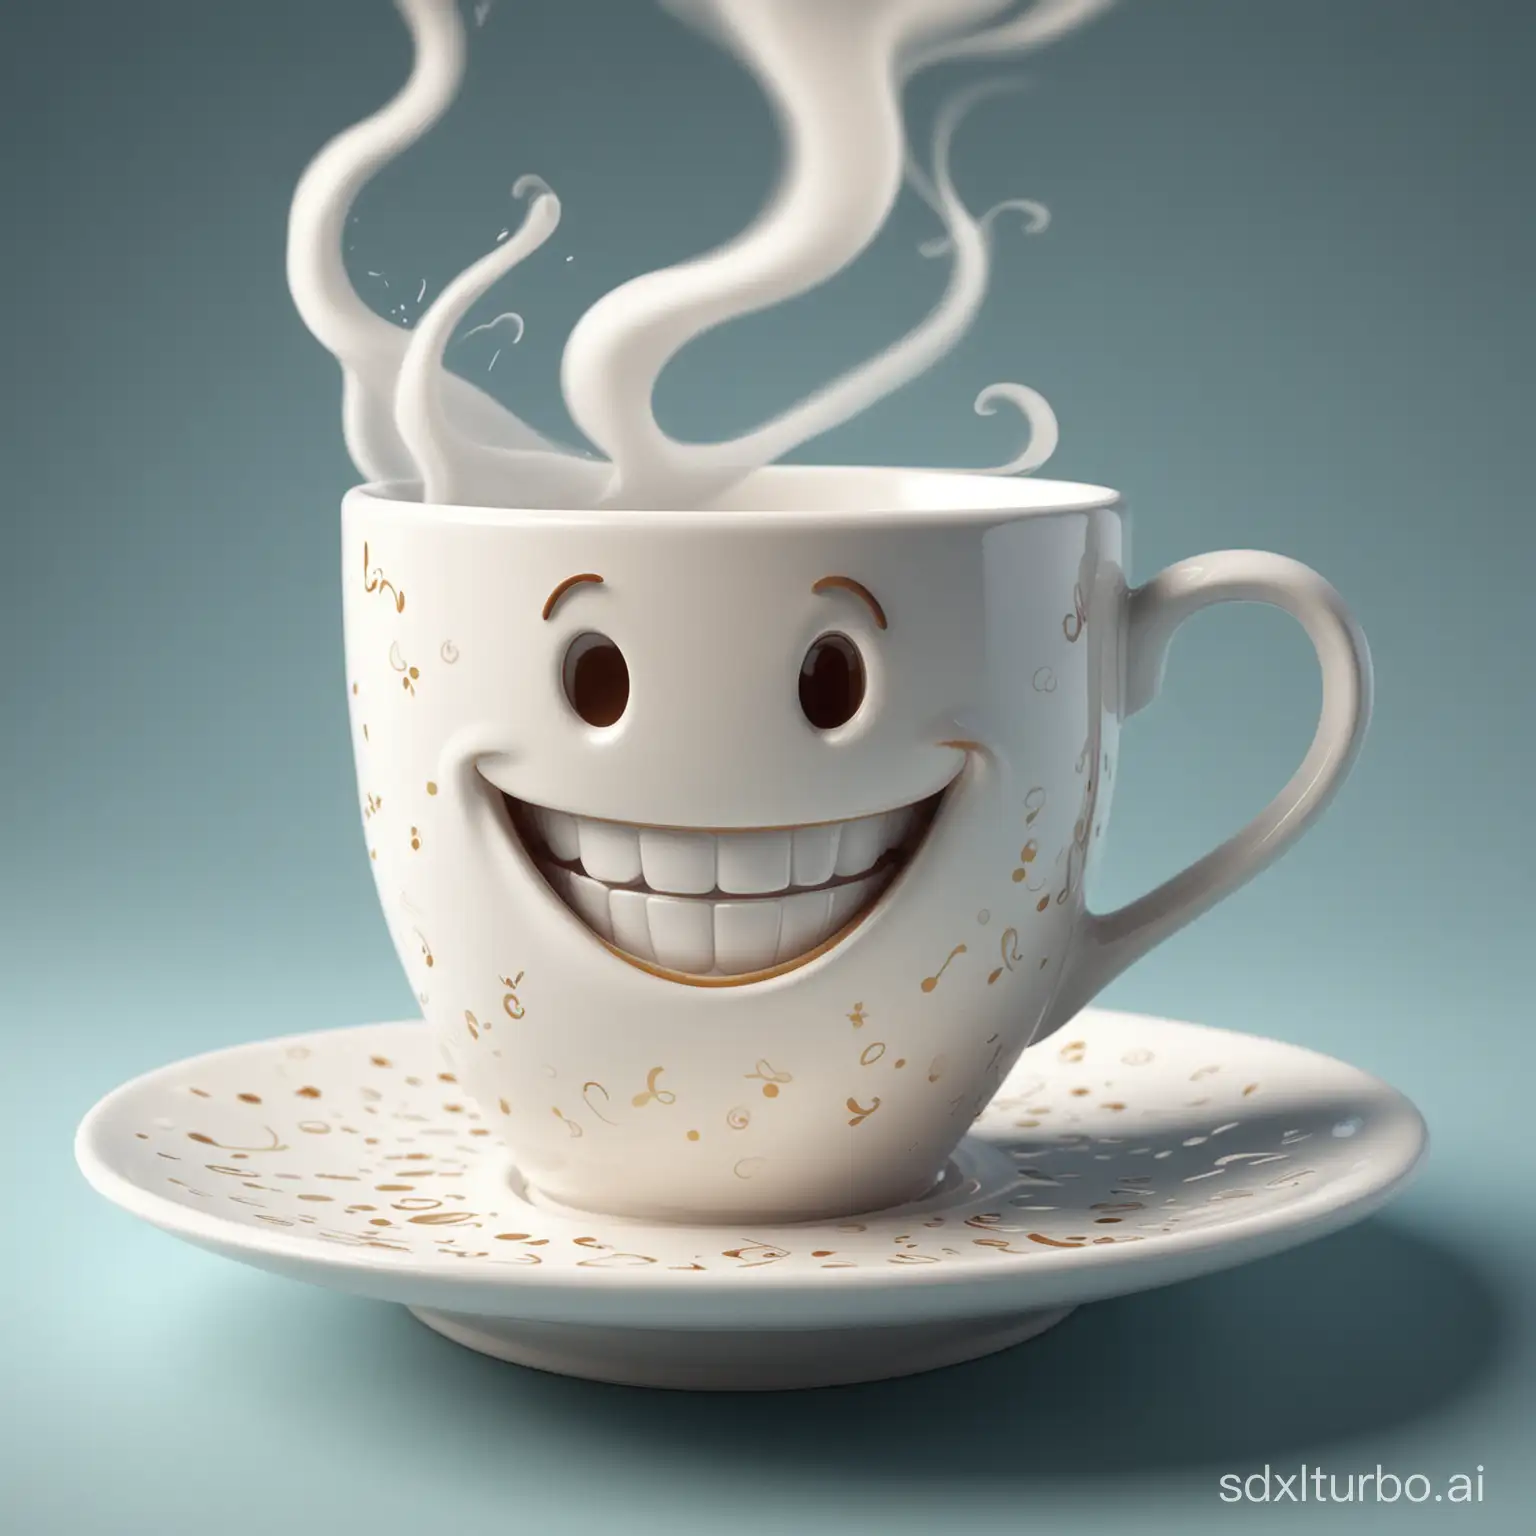 Whimsical-Coffee-Cup-with-Joyful-Smile-and-Swirling-Saucer